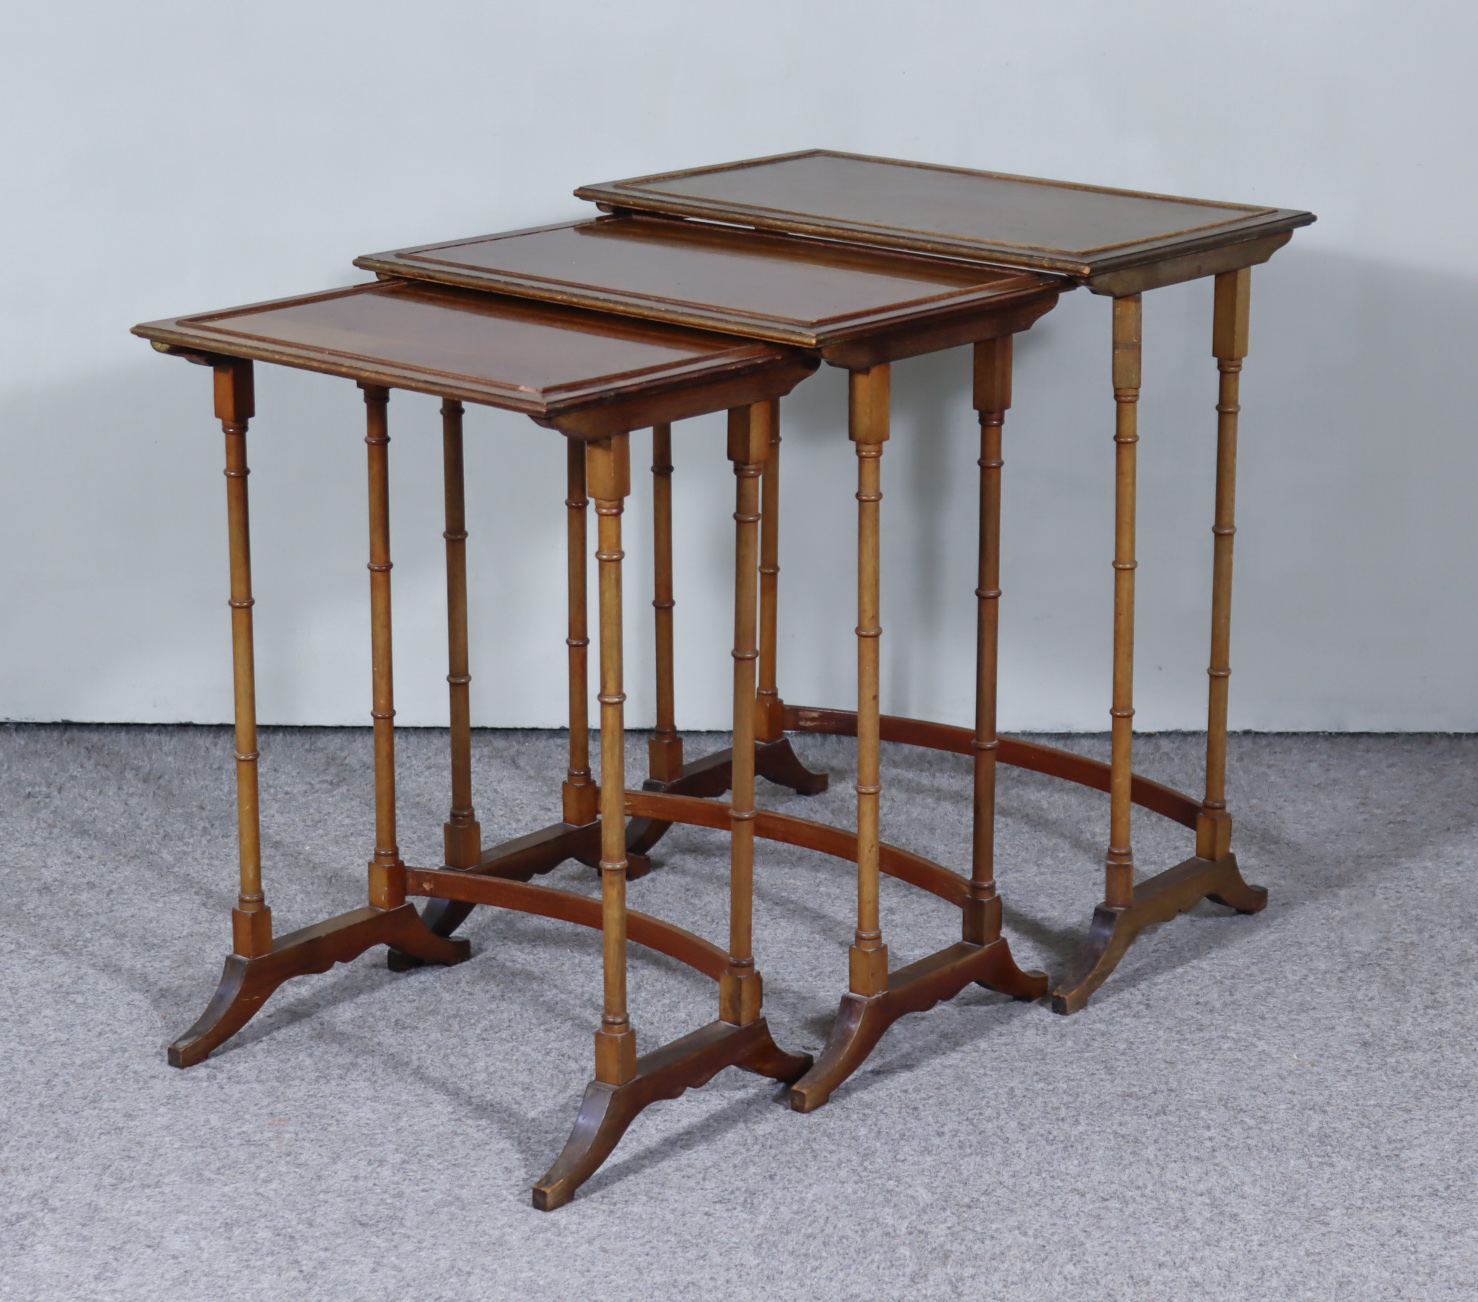 A Nest of Three Mahogany Rectangular Occasional Tables of "George III" Design, on slender turned